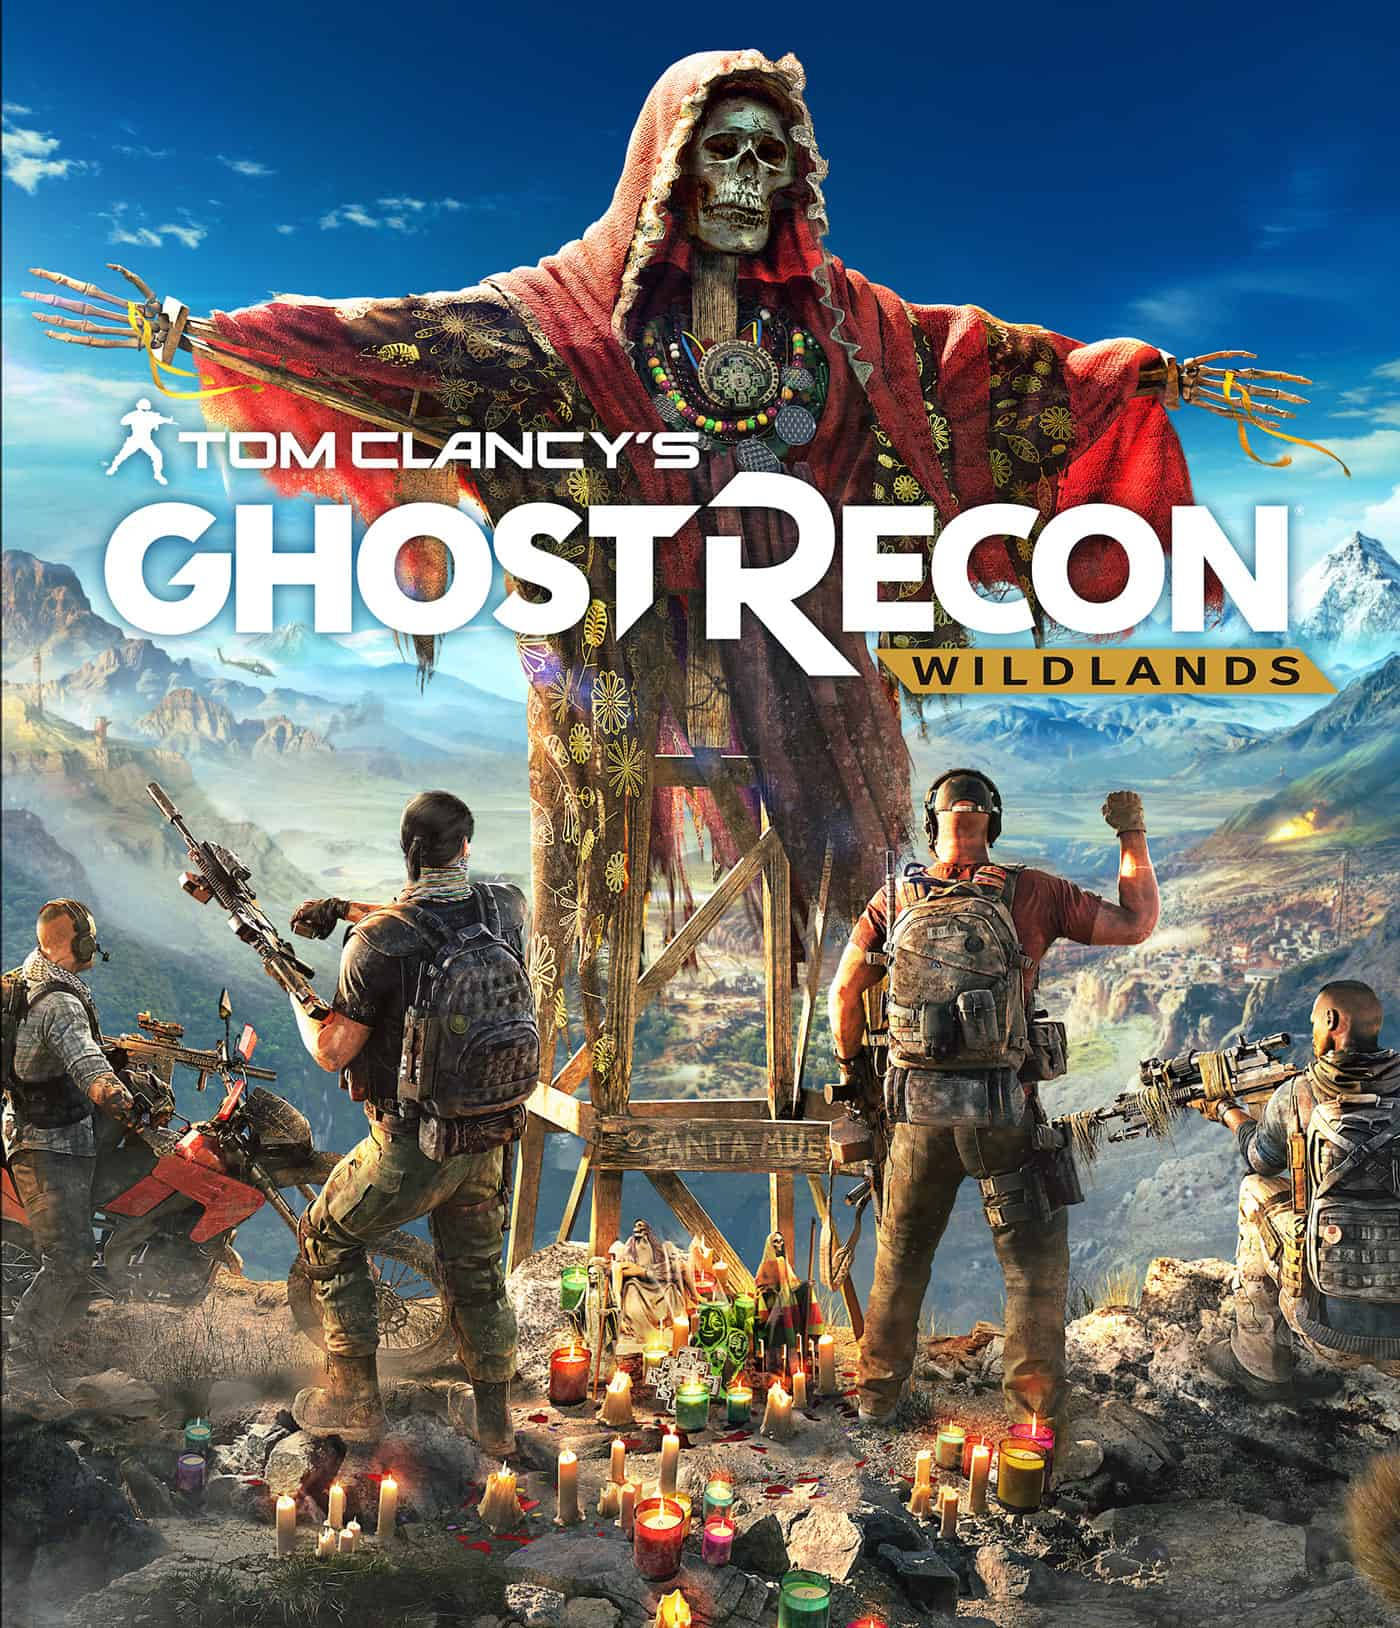 "Dynamic Action Scene from Tom Clancy's Ghost Recon: Wildlands" Wallpaper